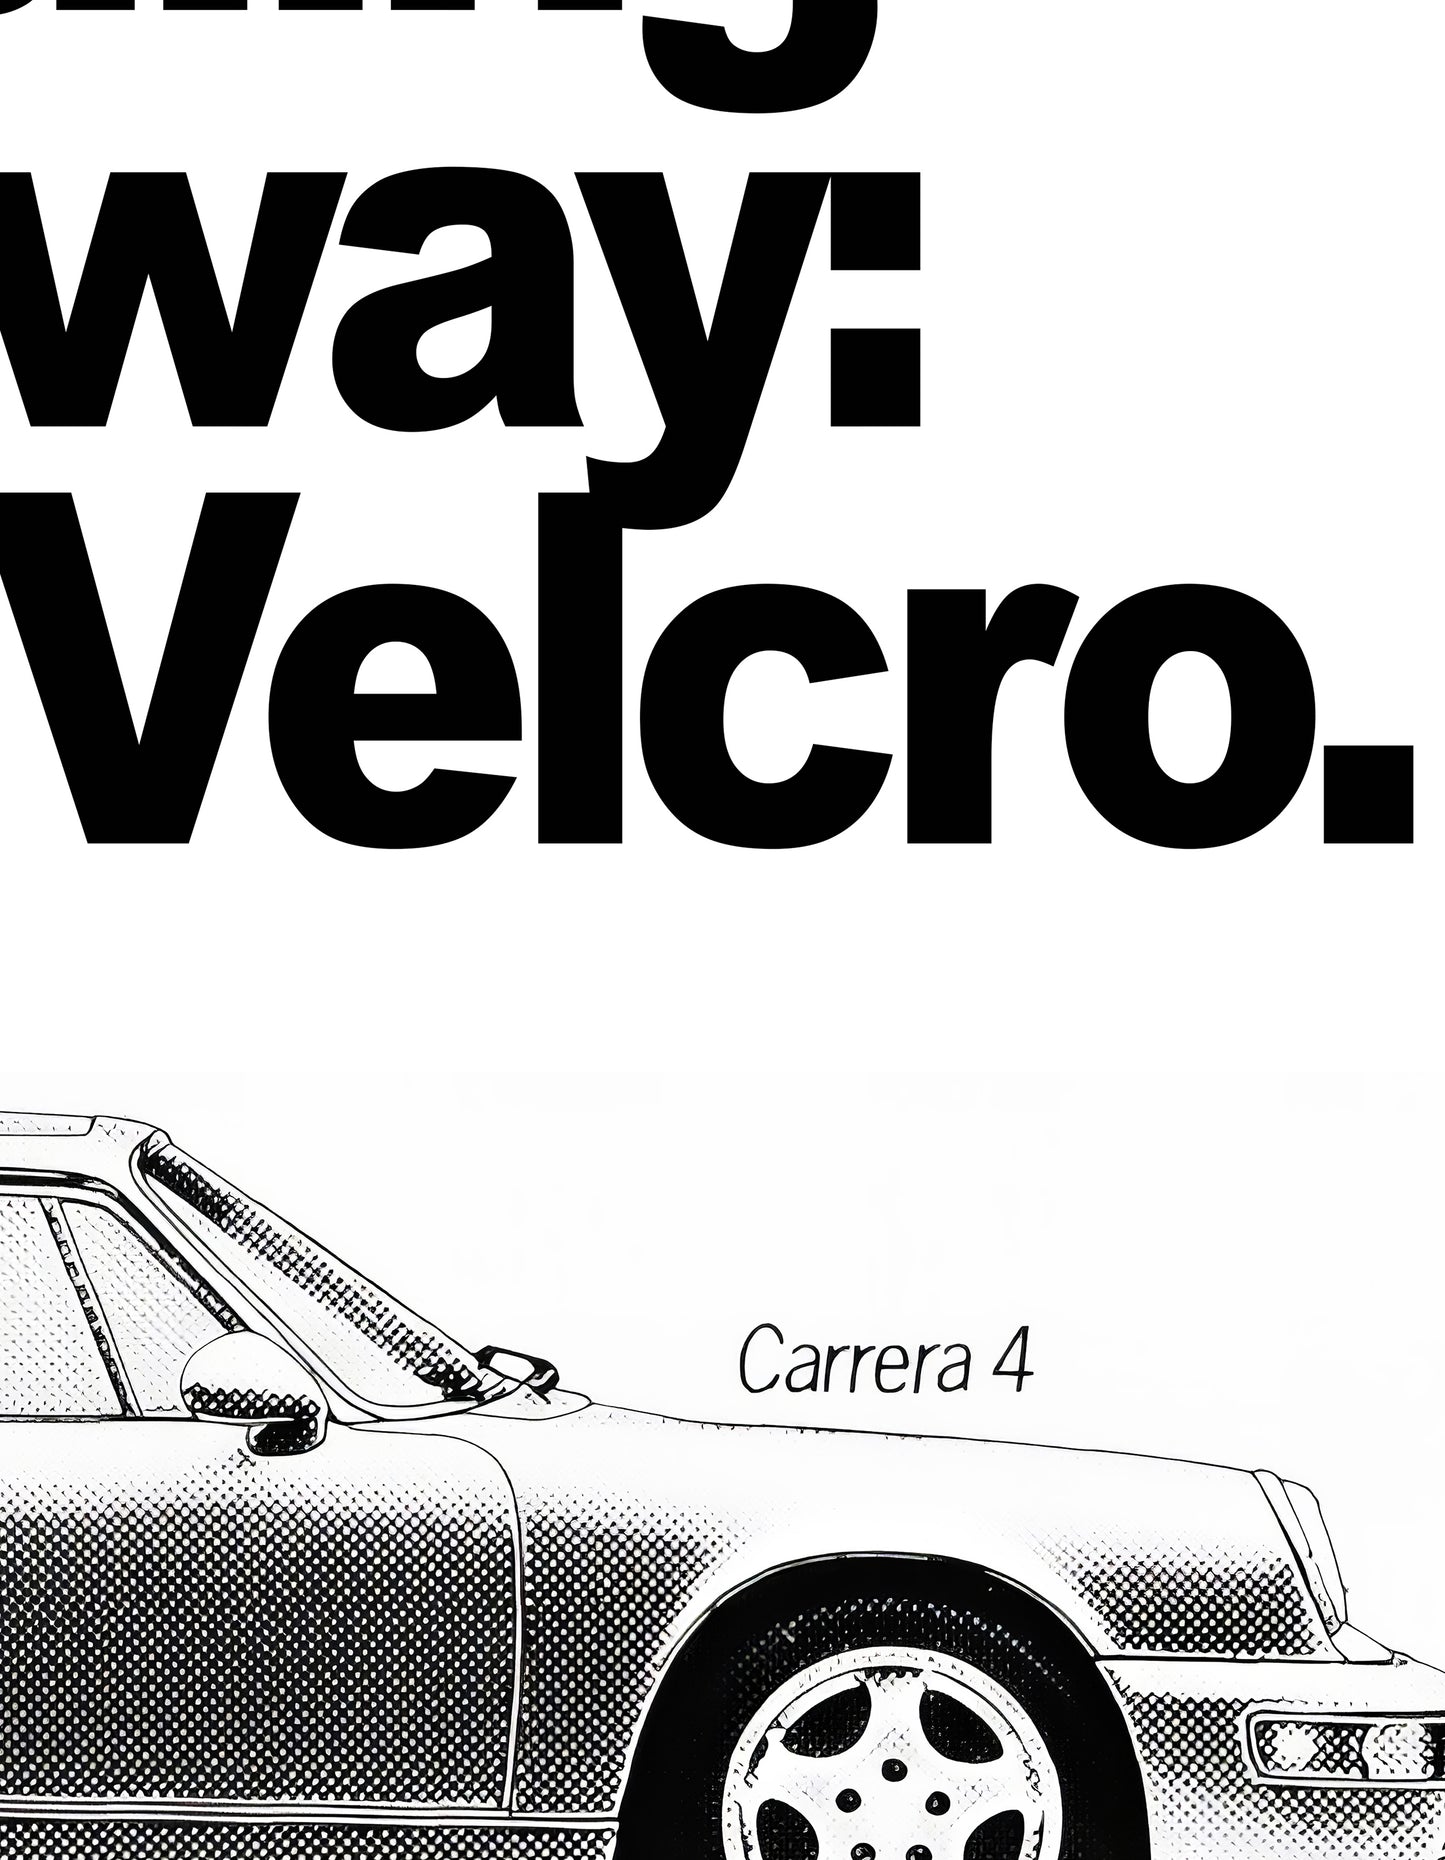 Porsche "Let Us Describe The Handling This Way: Rolling Velcro" Poster